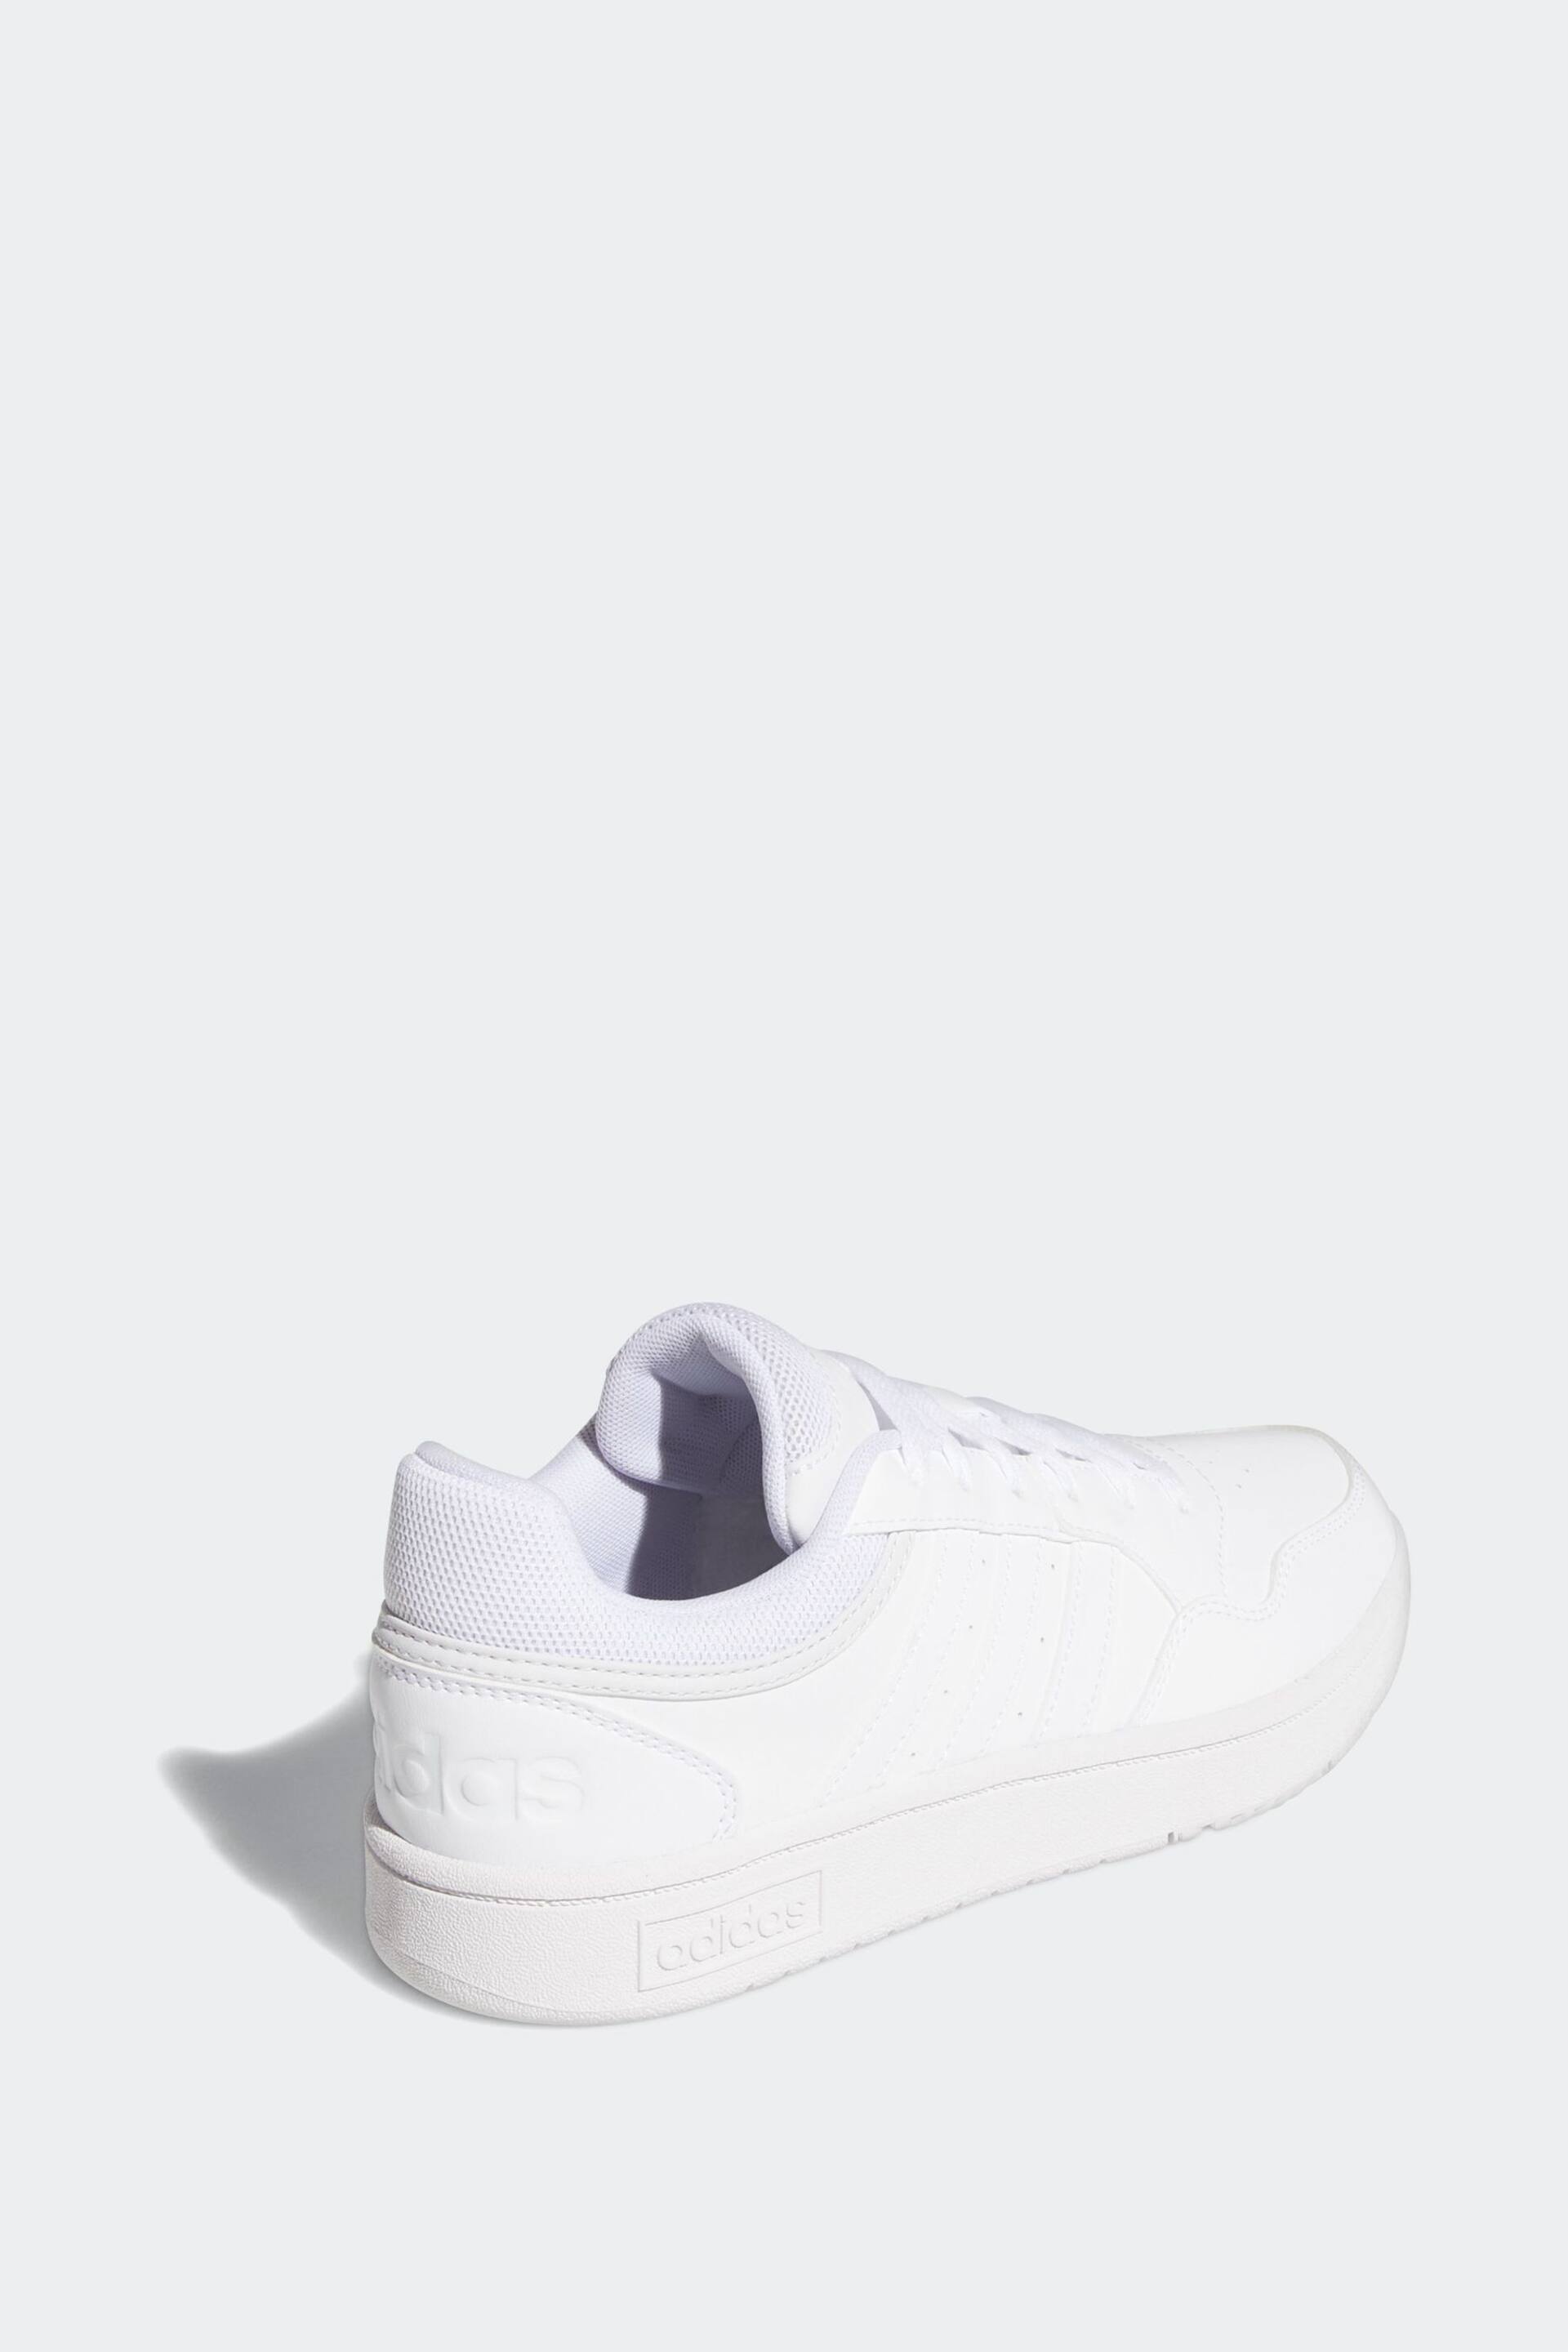 adidas Originals White Hoops 3.0 Low Classic Trainers - Image 5 of 11